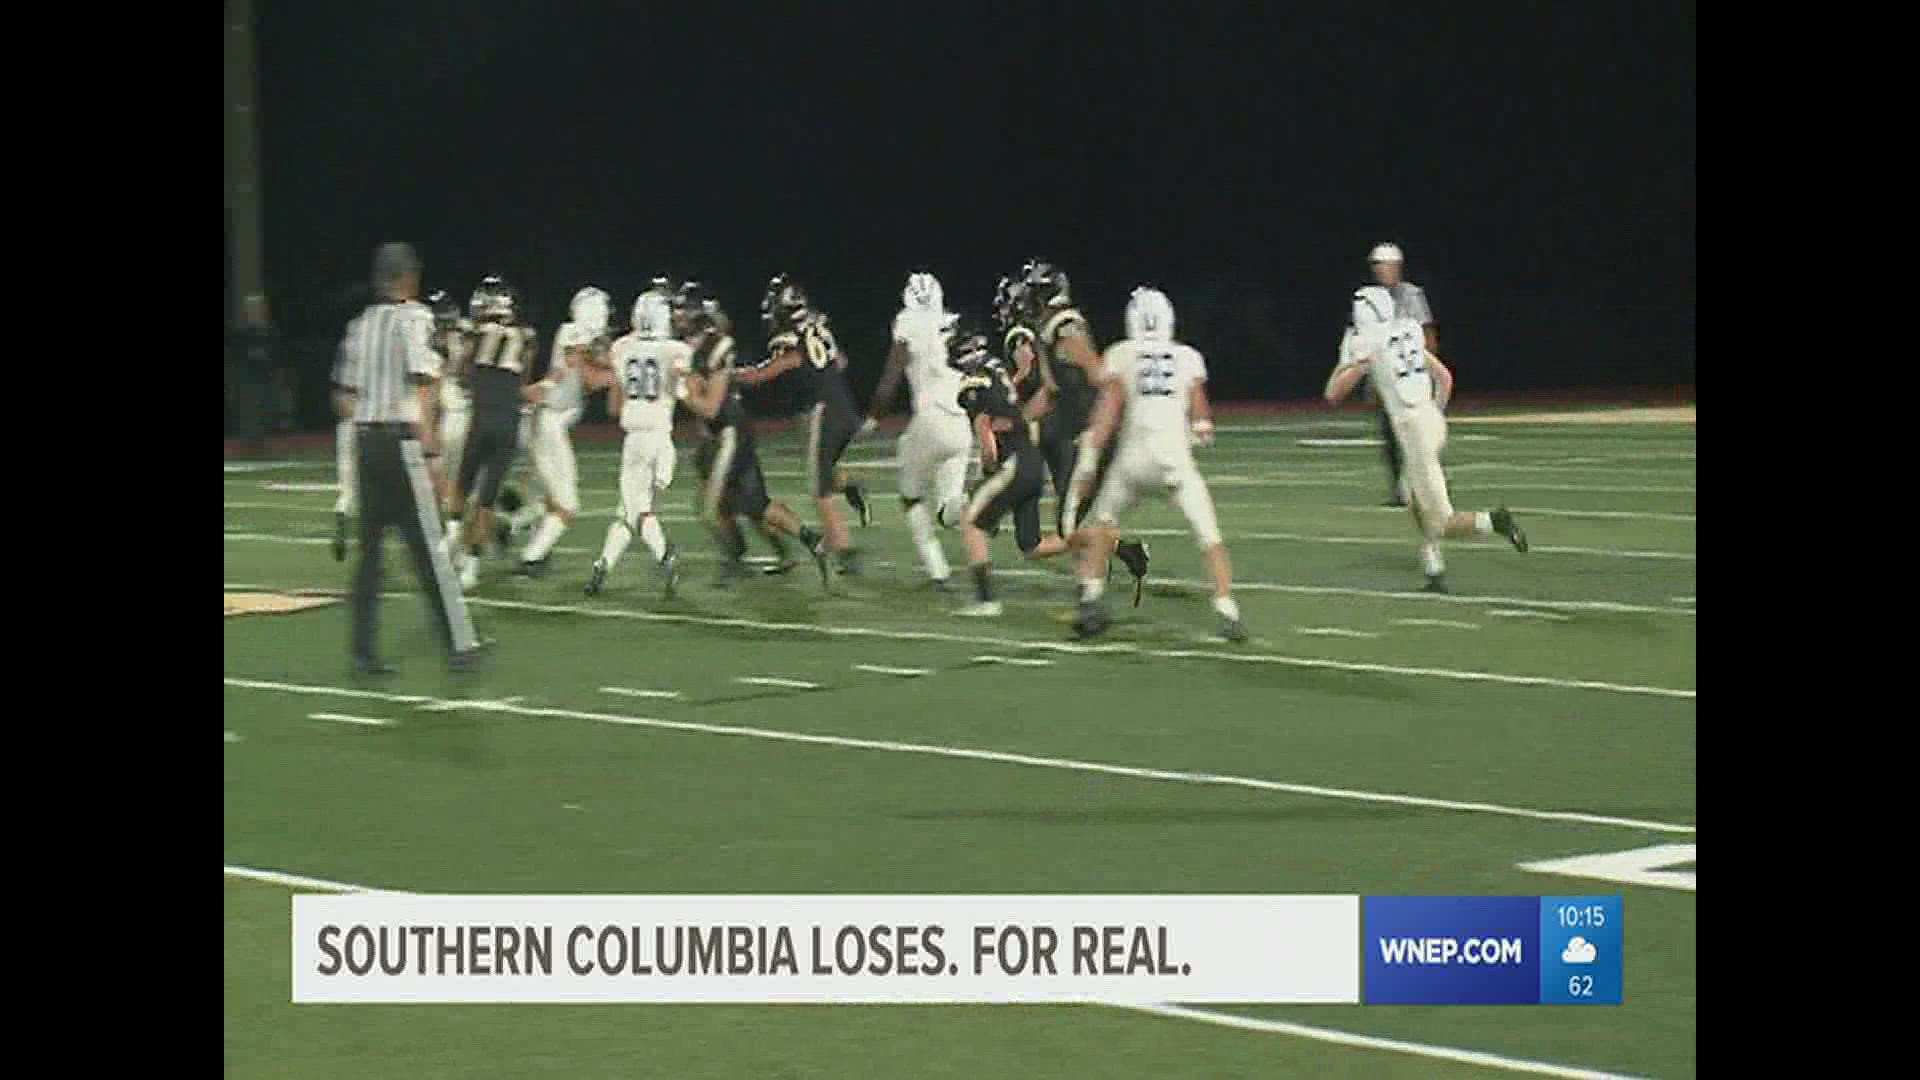 Before Friday Southern Columbia hadn't lost a football game of any kind in more than four years.